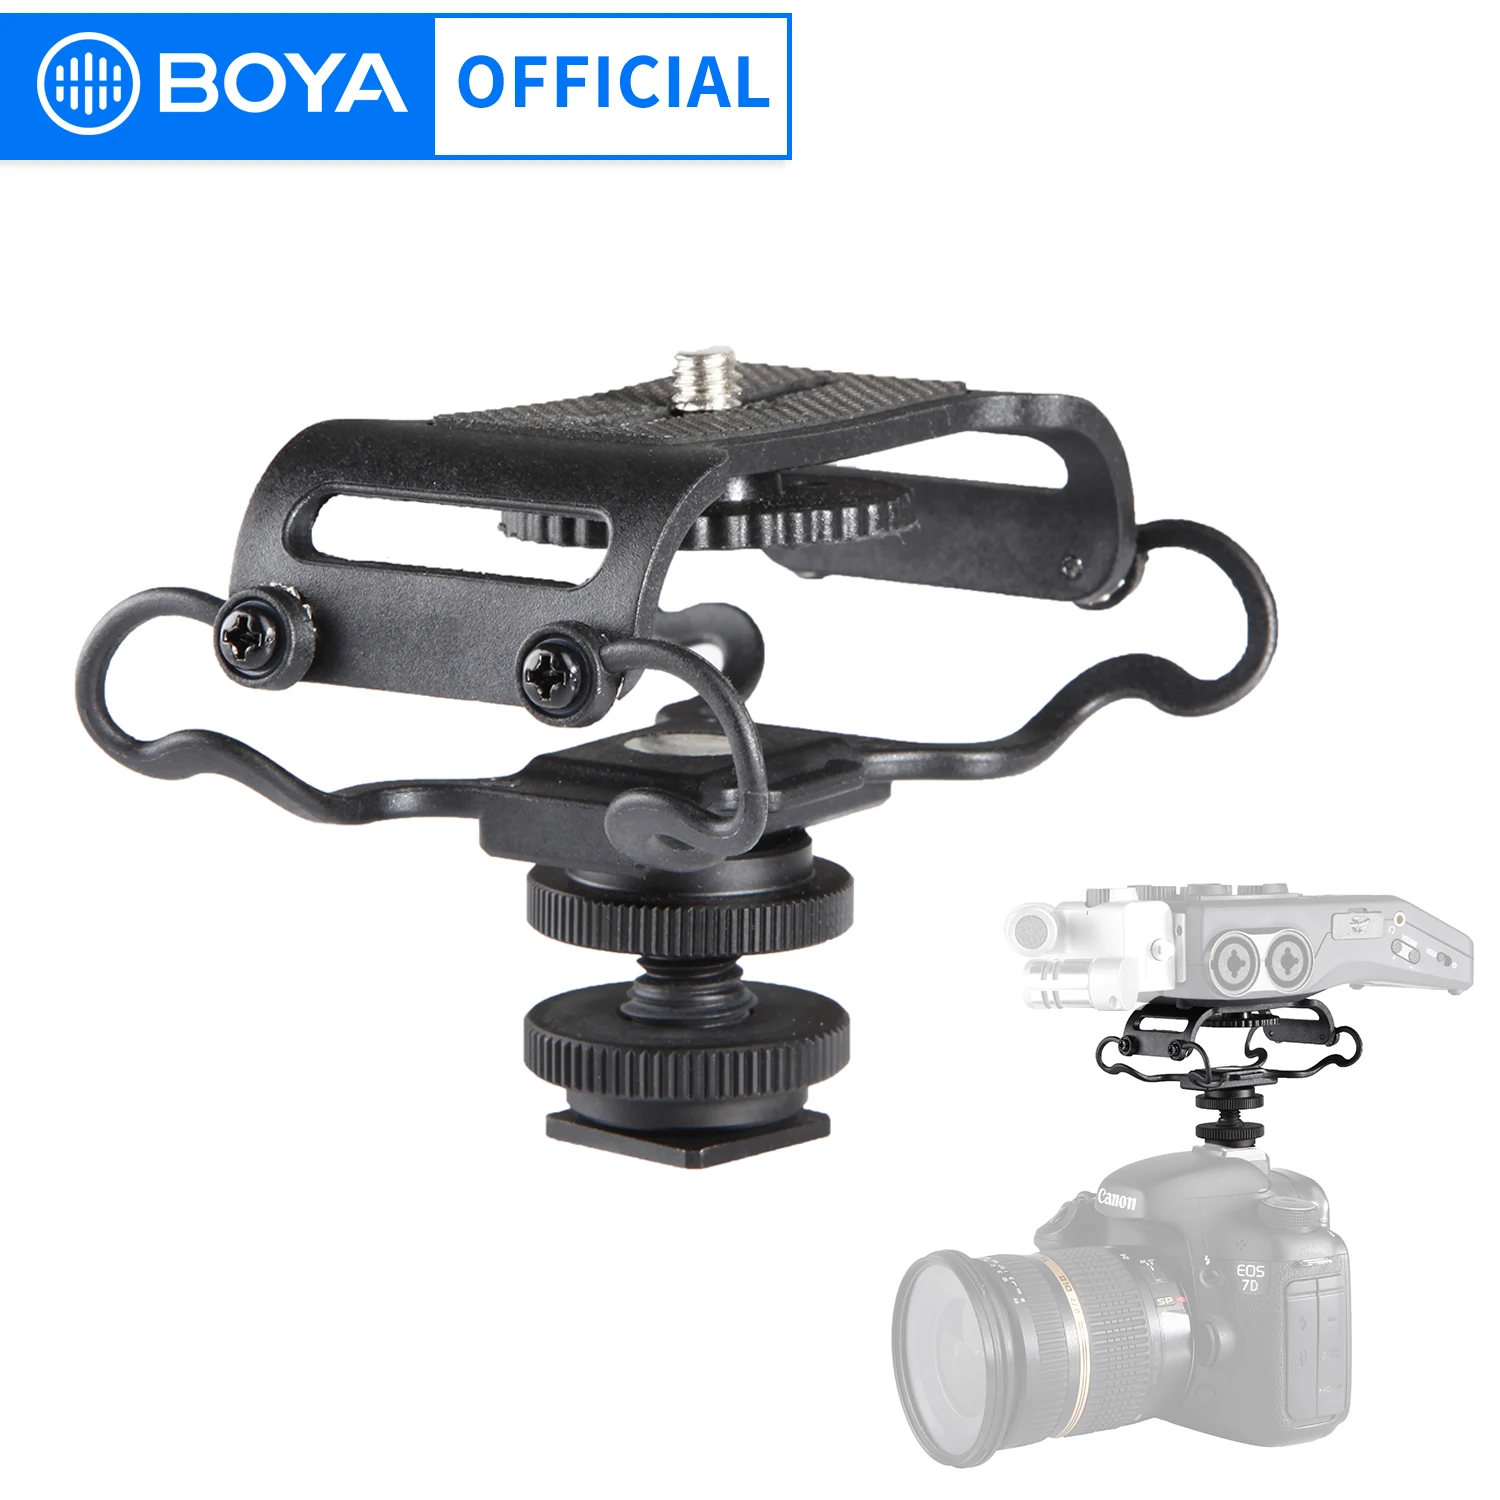 

BOYA BY-C10 Microphone Shock Mount for Zoom H4n/H5/H6 for Sony Tascam DR-40 DR-05 Recorders Microfone Shockmount Olympus Tascam